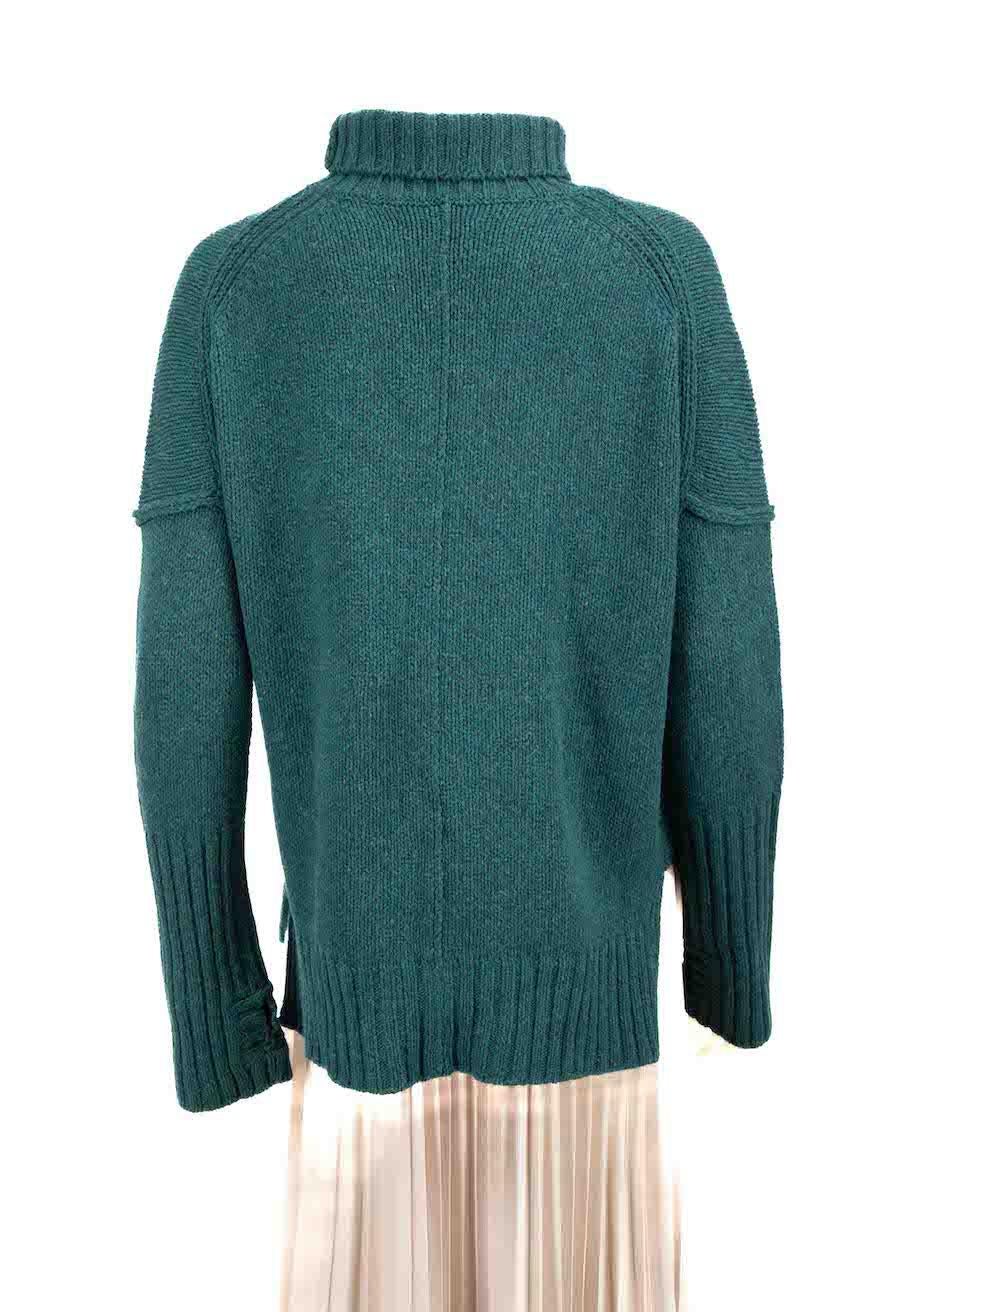 Zadig & Voltaire Green Wool Logo Turtleneck Jumper Size S In Excellent Condition For Sale In London, GB